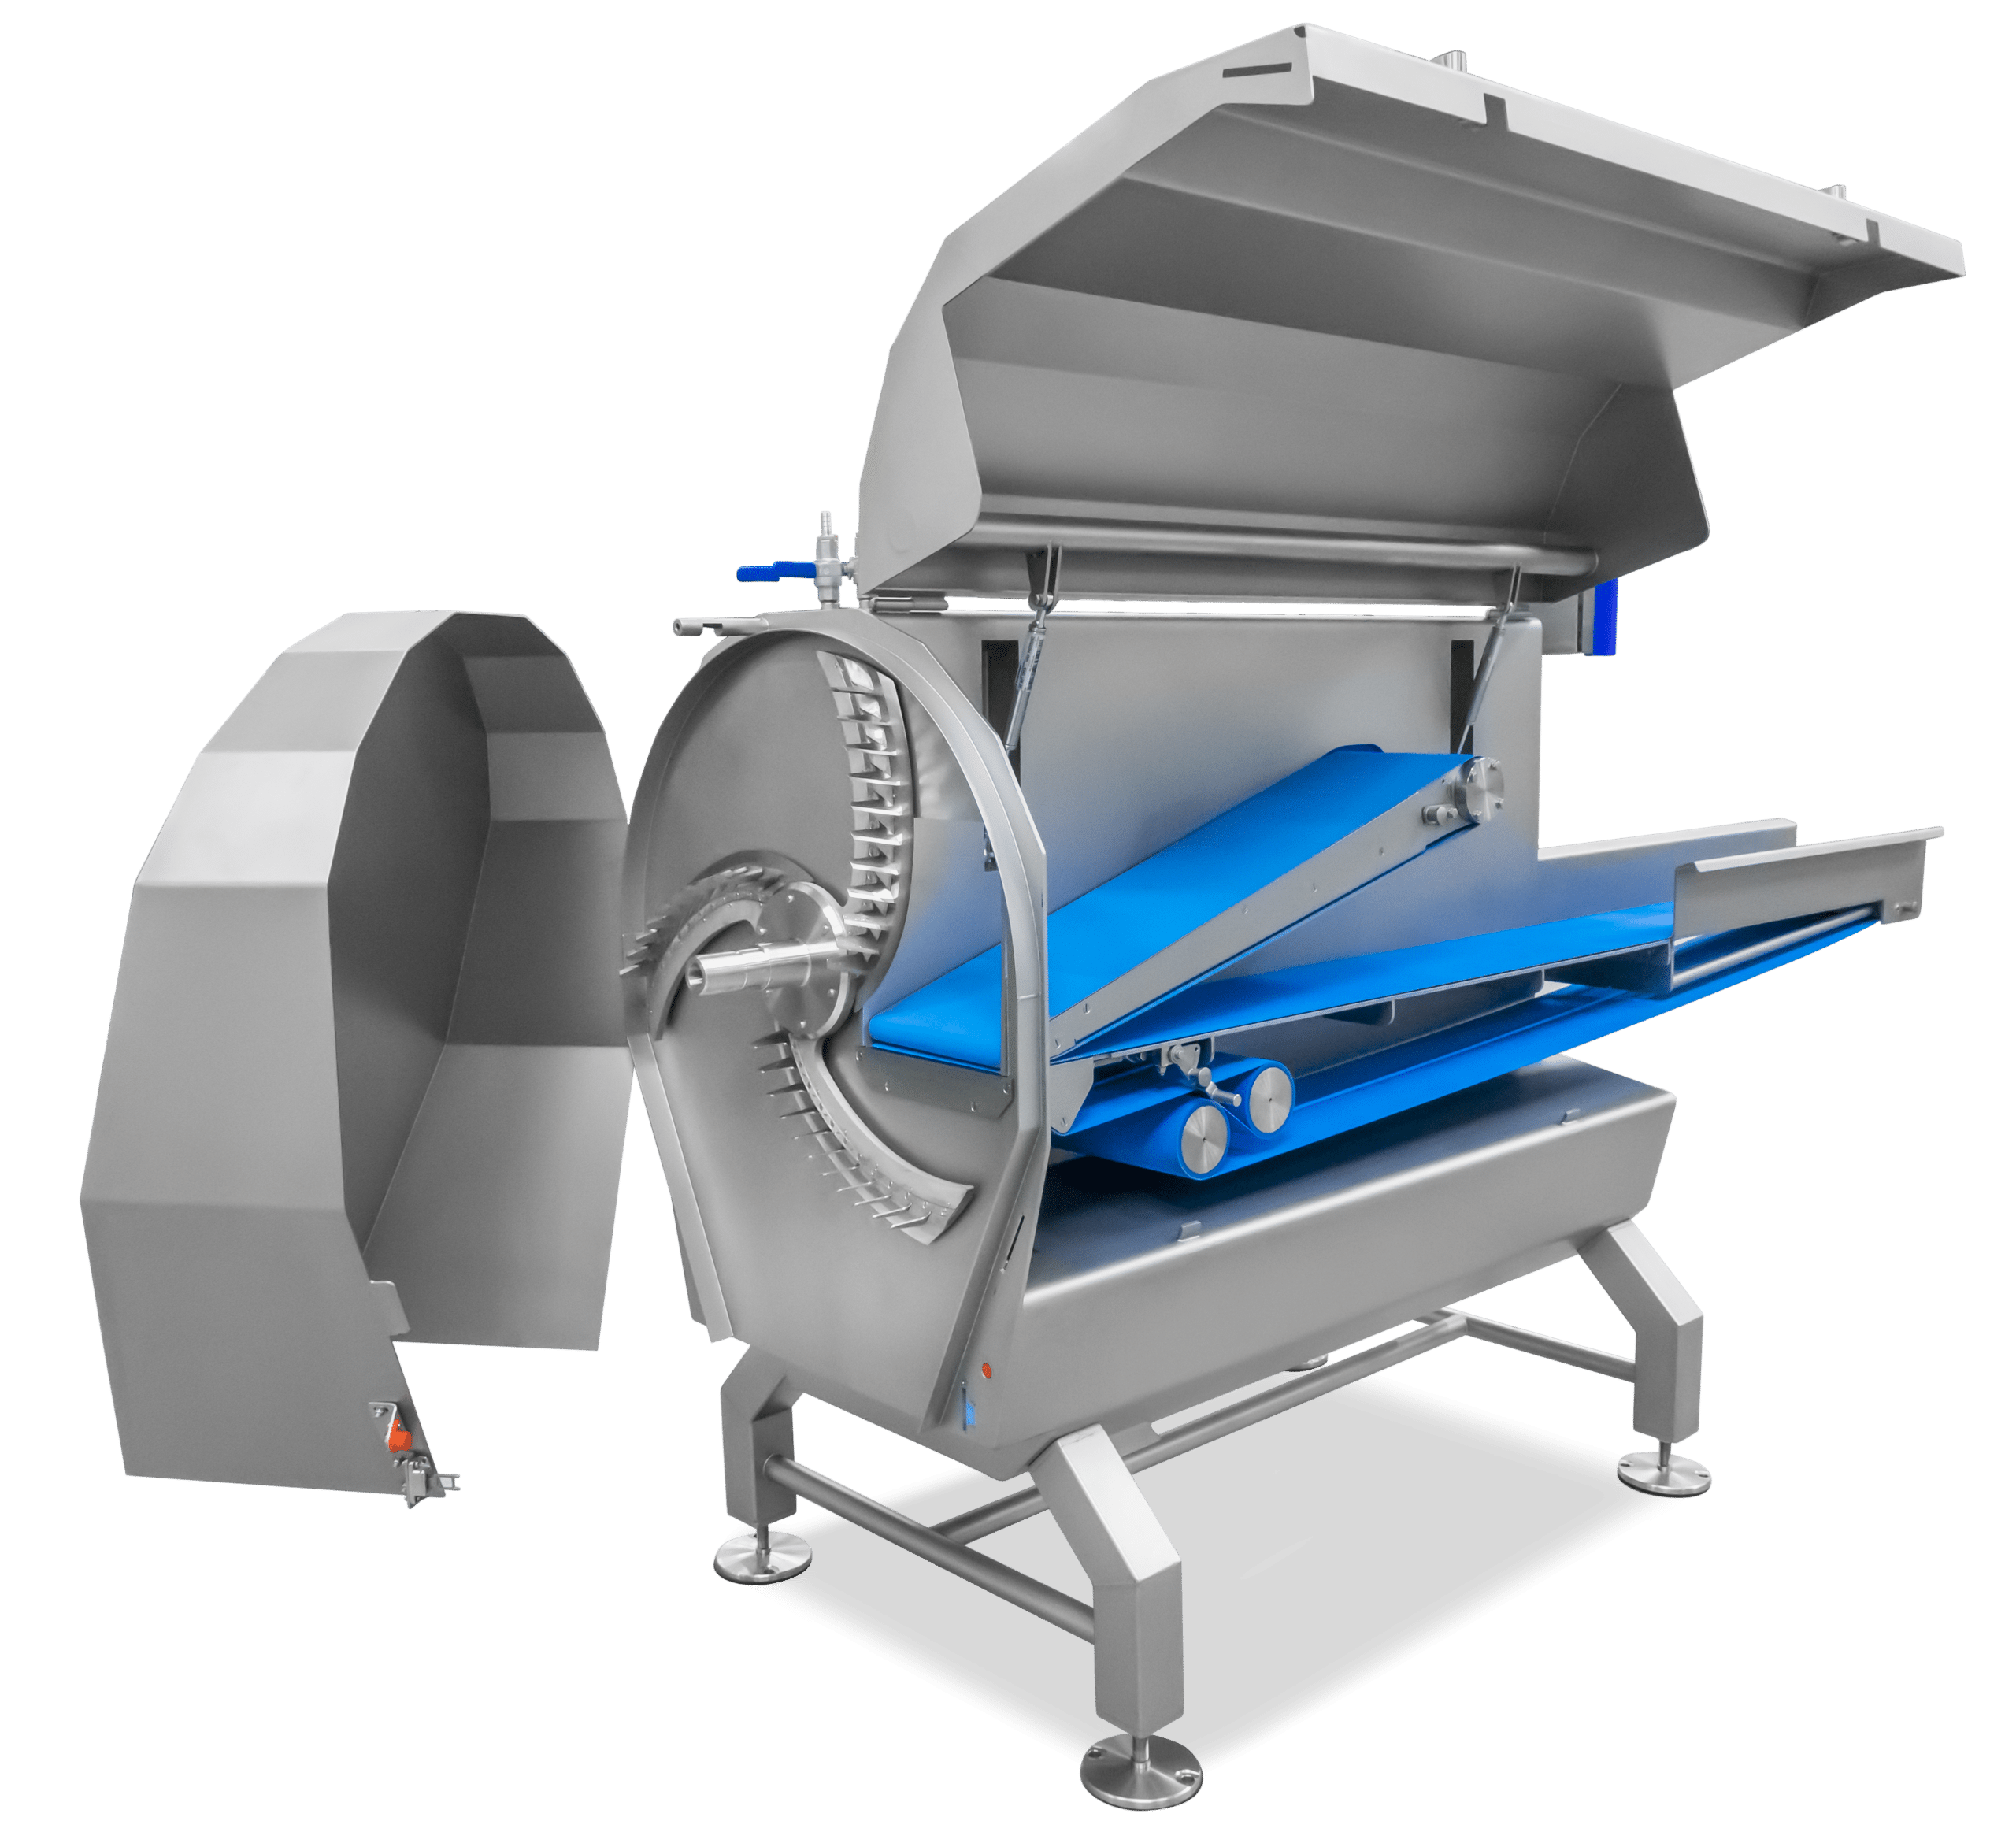 Industrial vegetable cutting machine with a high capacity